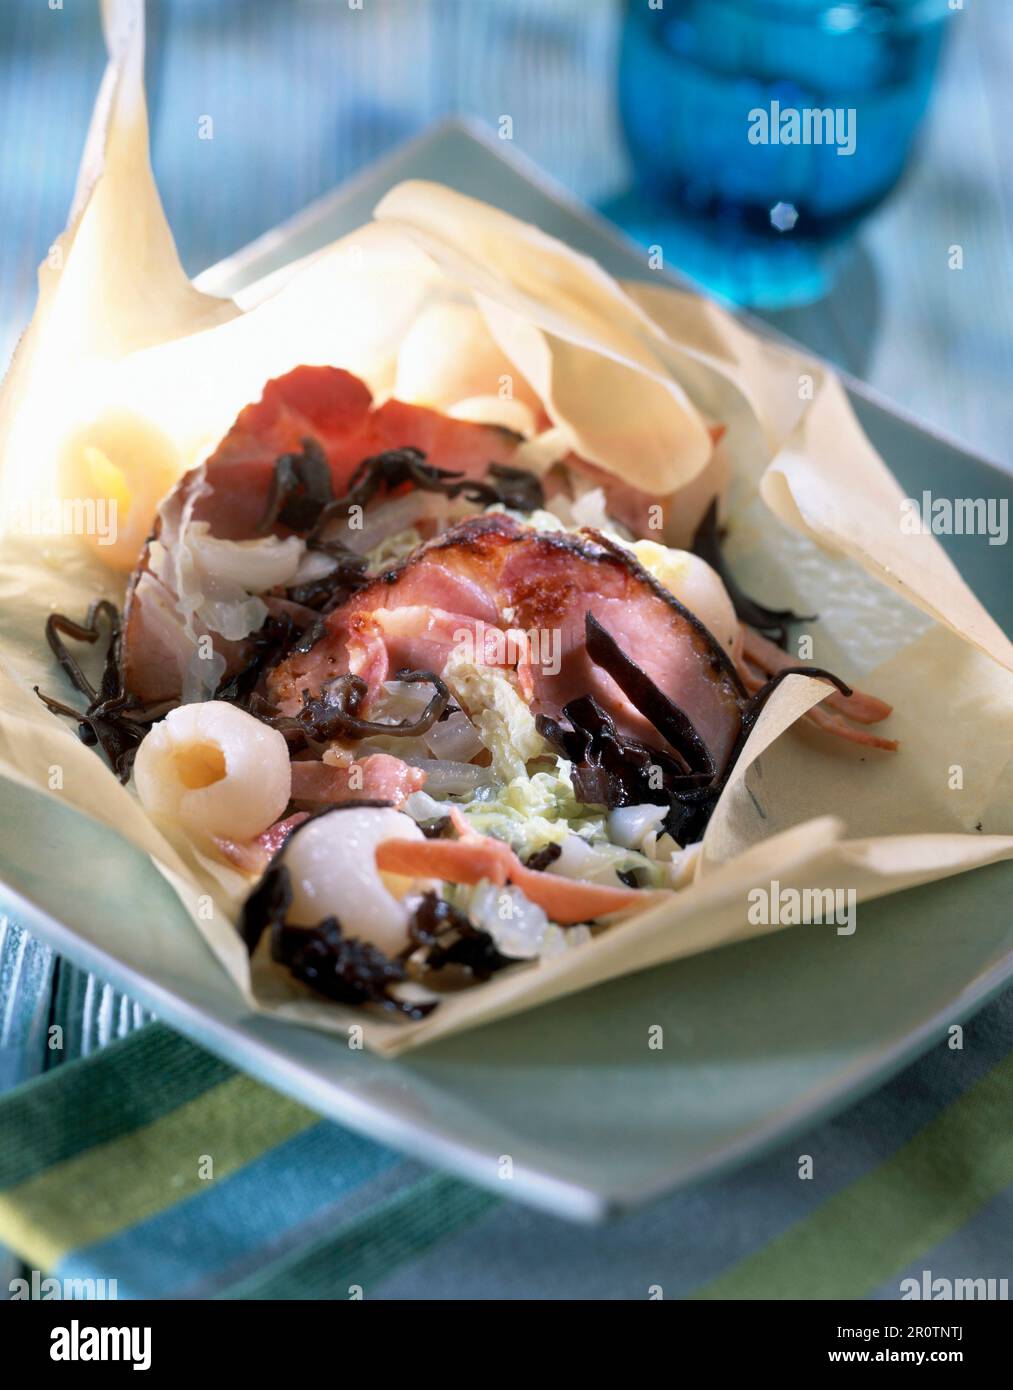 Oriental-style roast pork cooked in wax paper Stock Photo